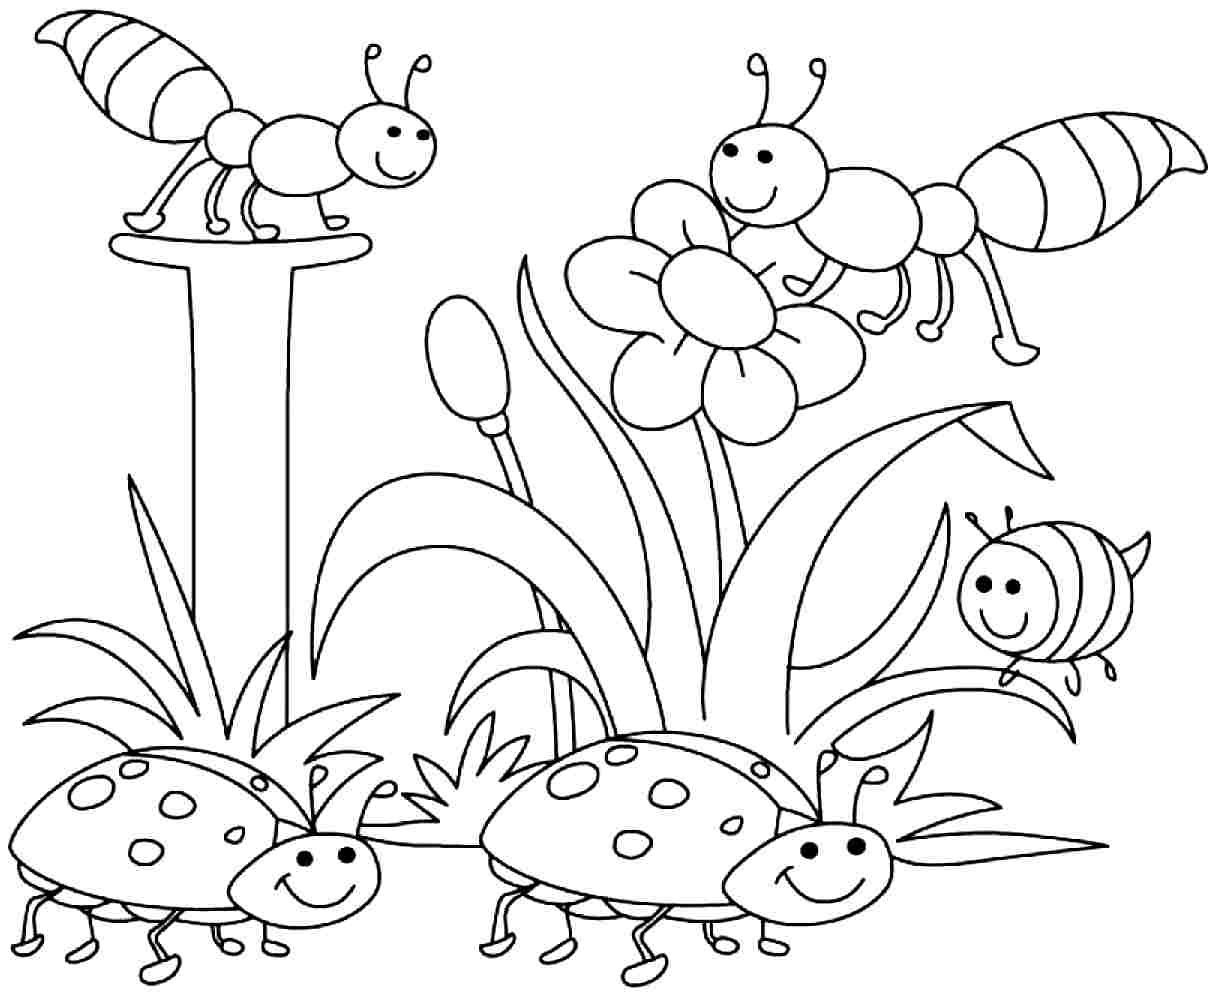 Free Spring Coloring Pages For Adults - Coloring Home